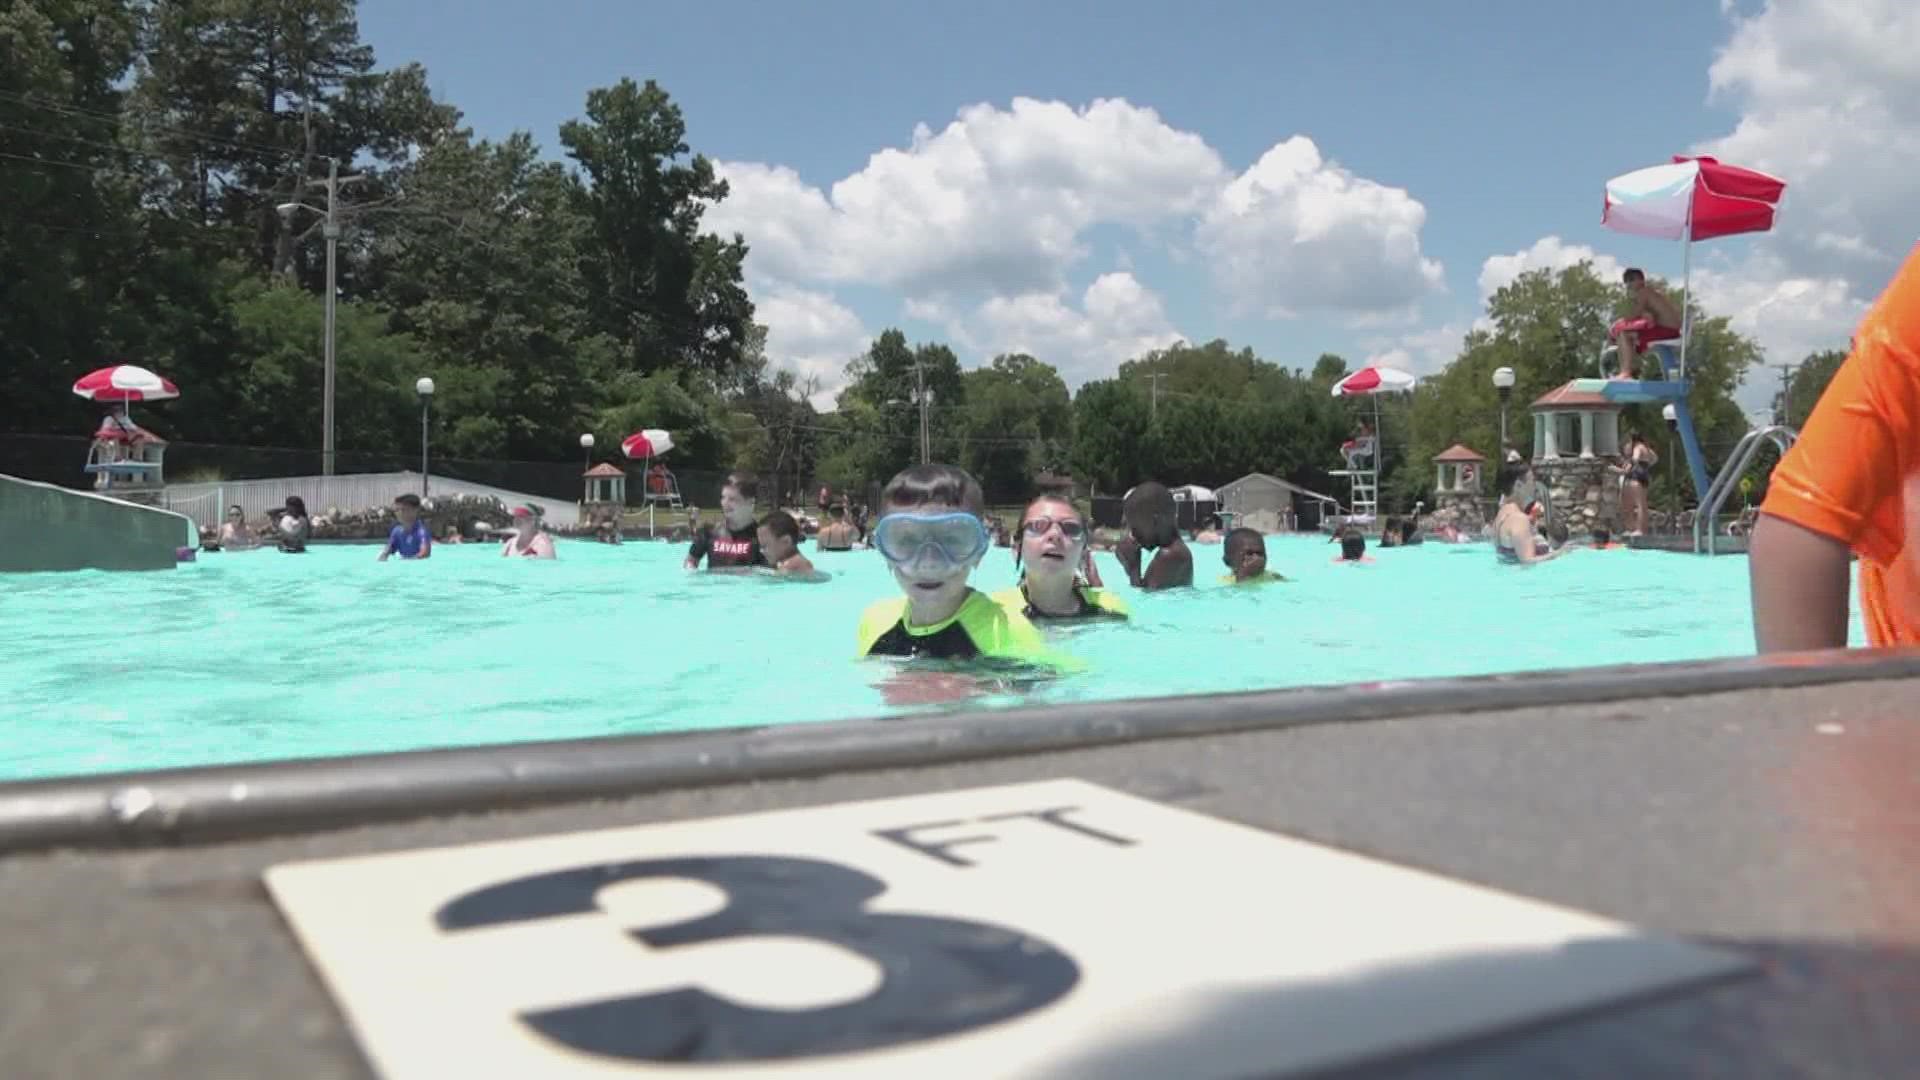 Built in the 1930s, the pool has been a favorite for people to enjoy during the hot summer months for decades.